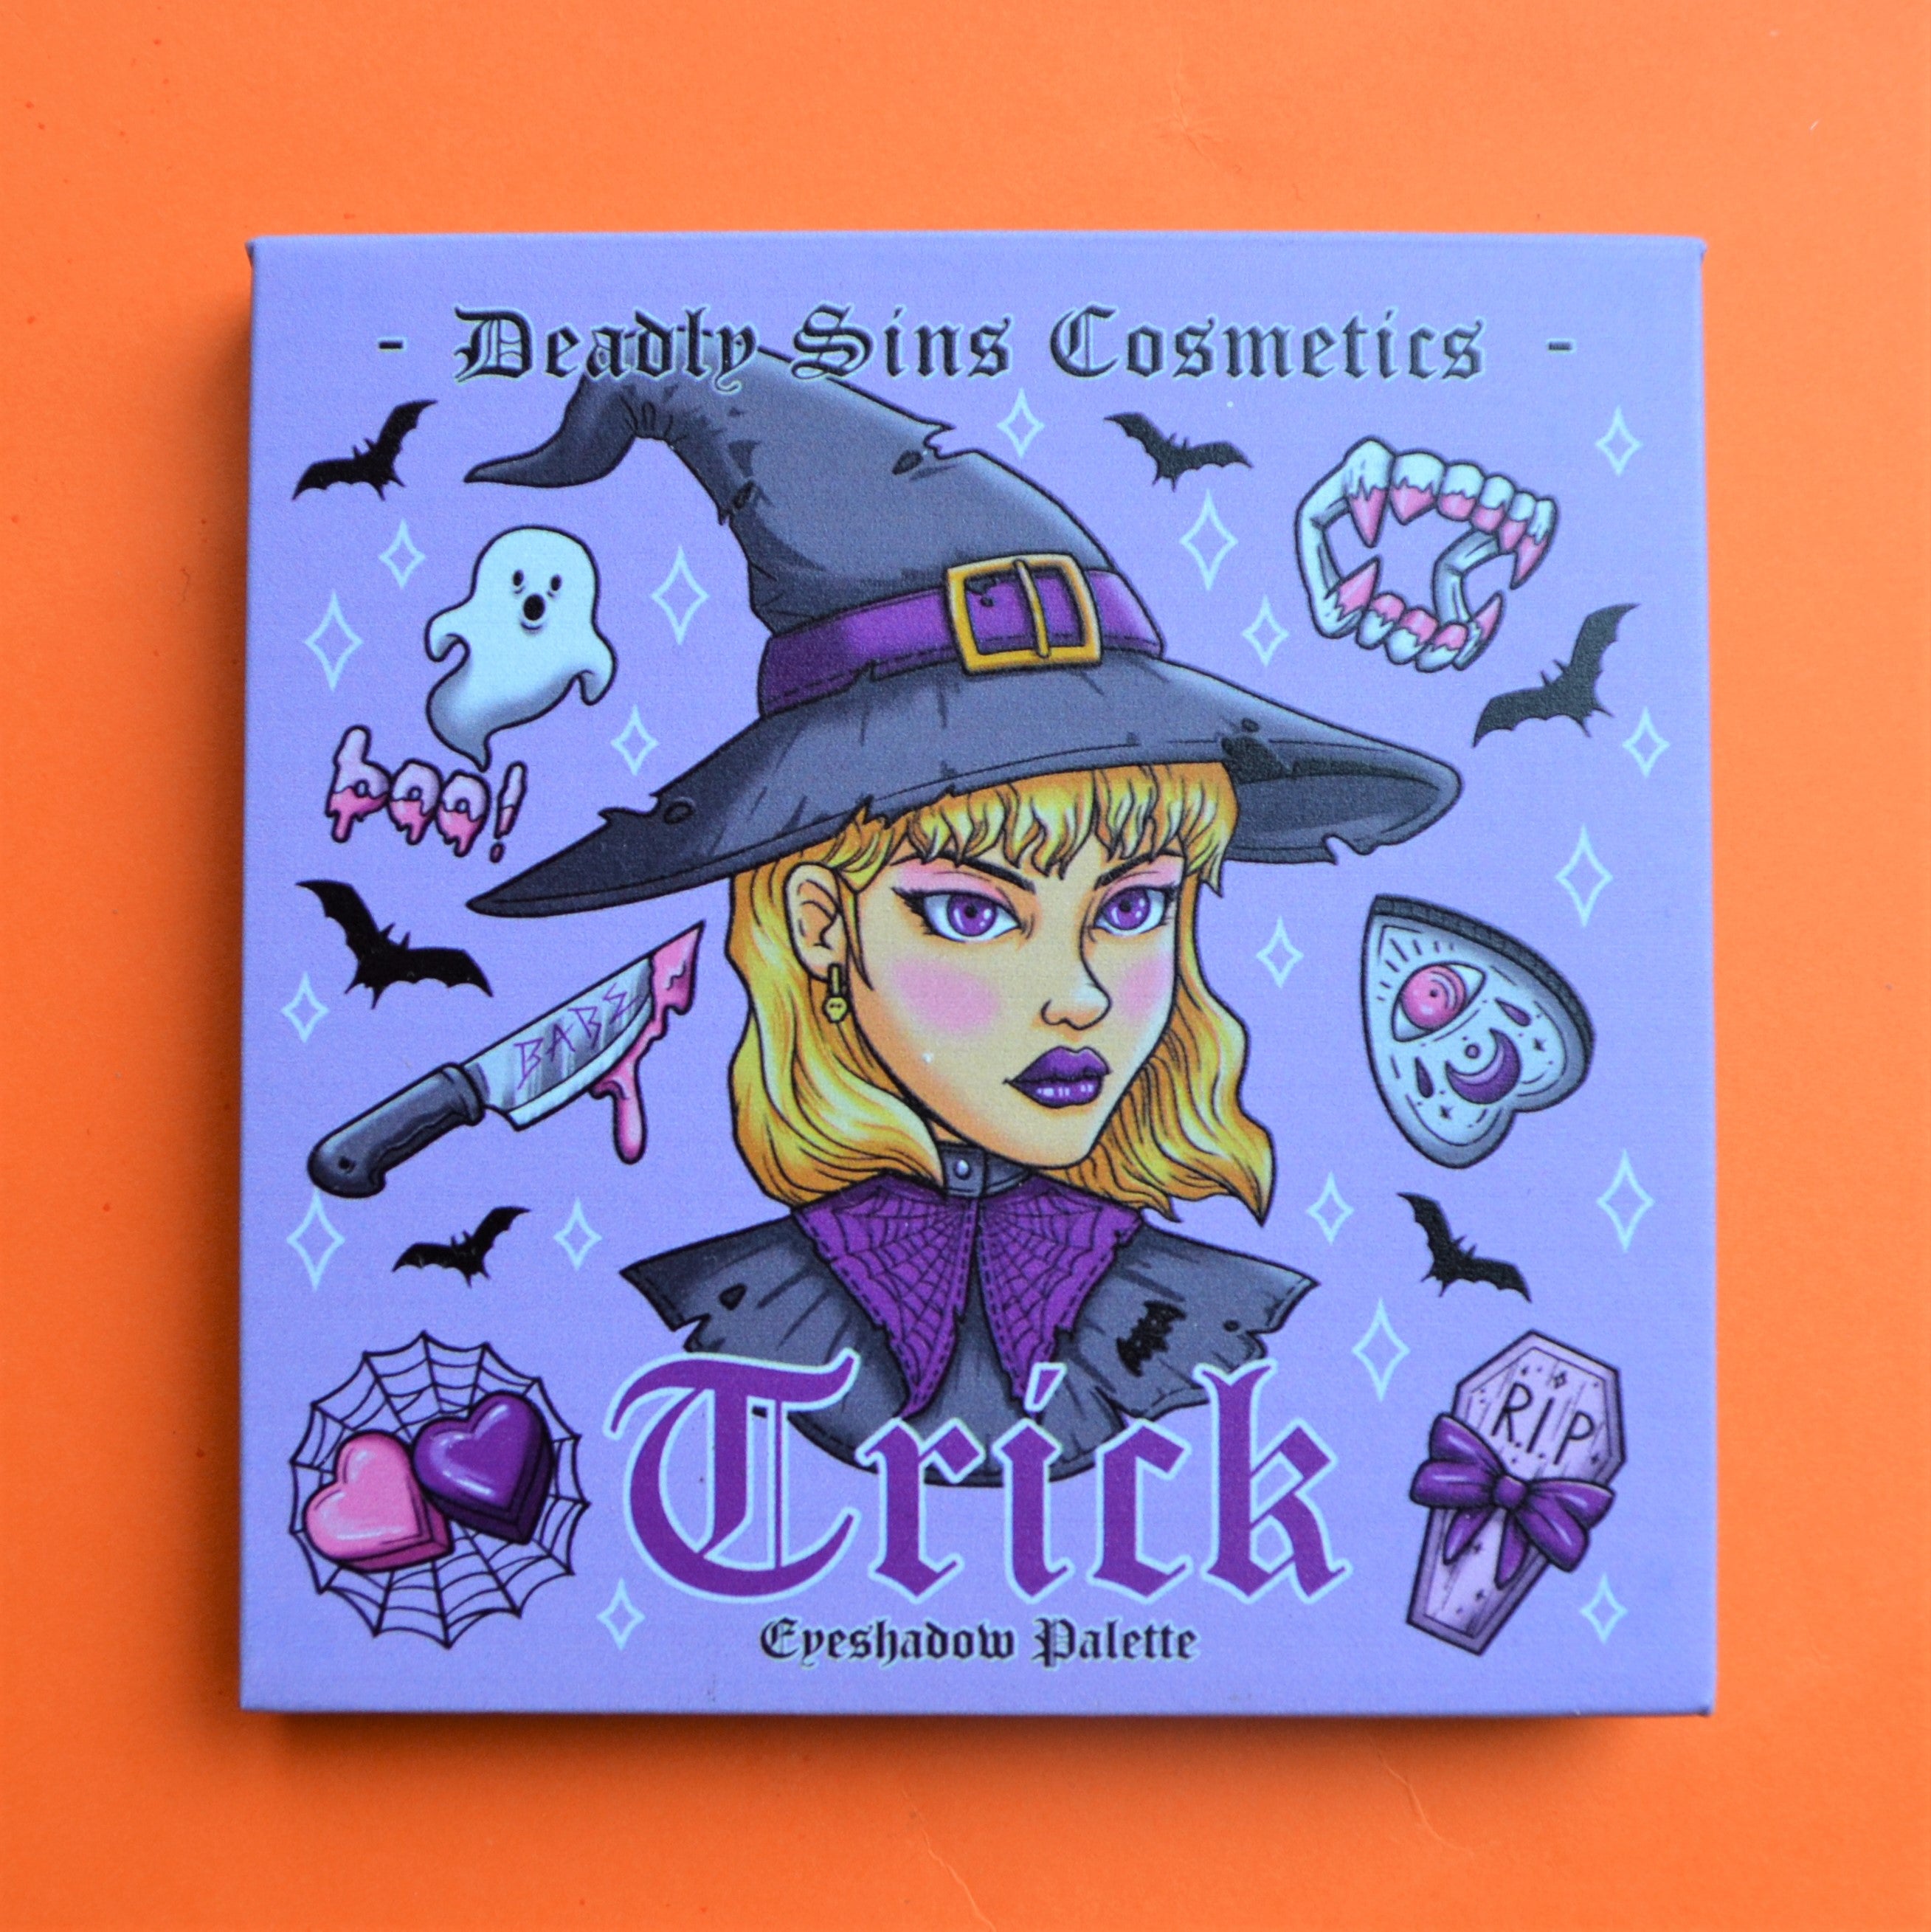 Trick or treat deadly sins cosmetics halloween eyeshadow palette witch spooky gothic makeup Australia indie brand